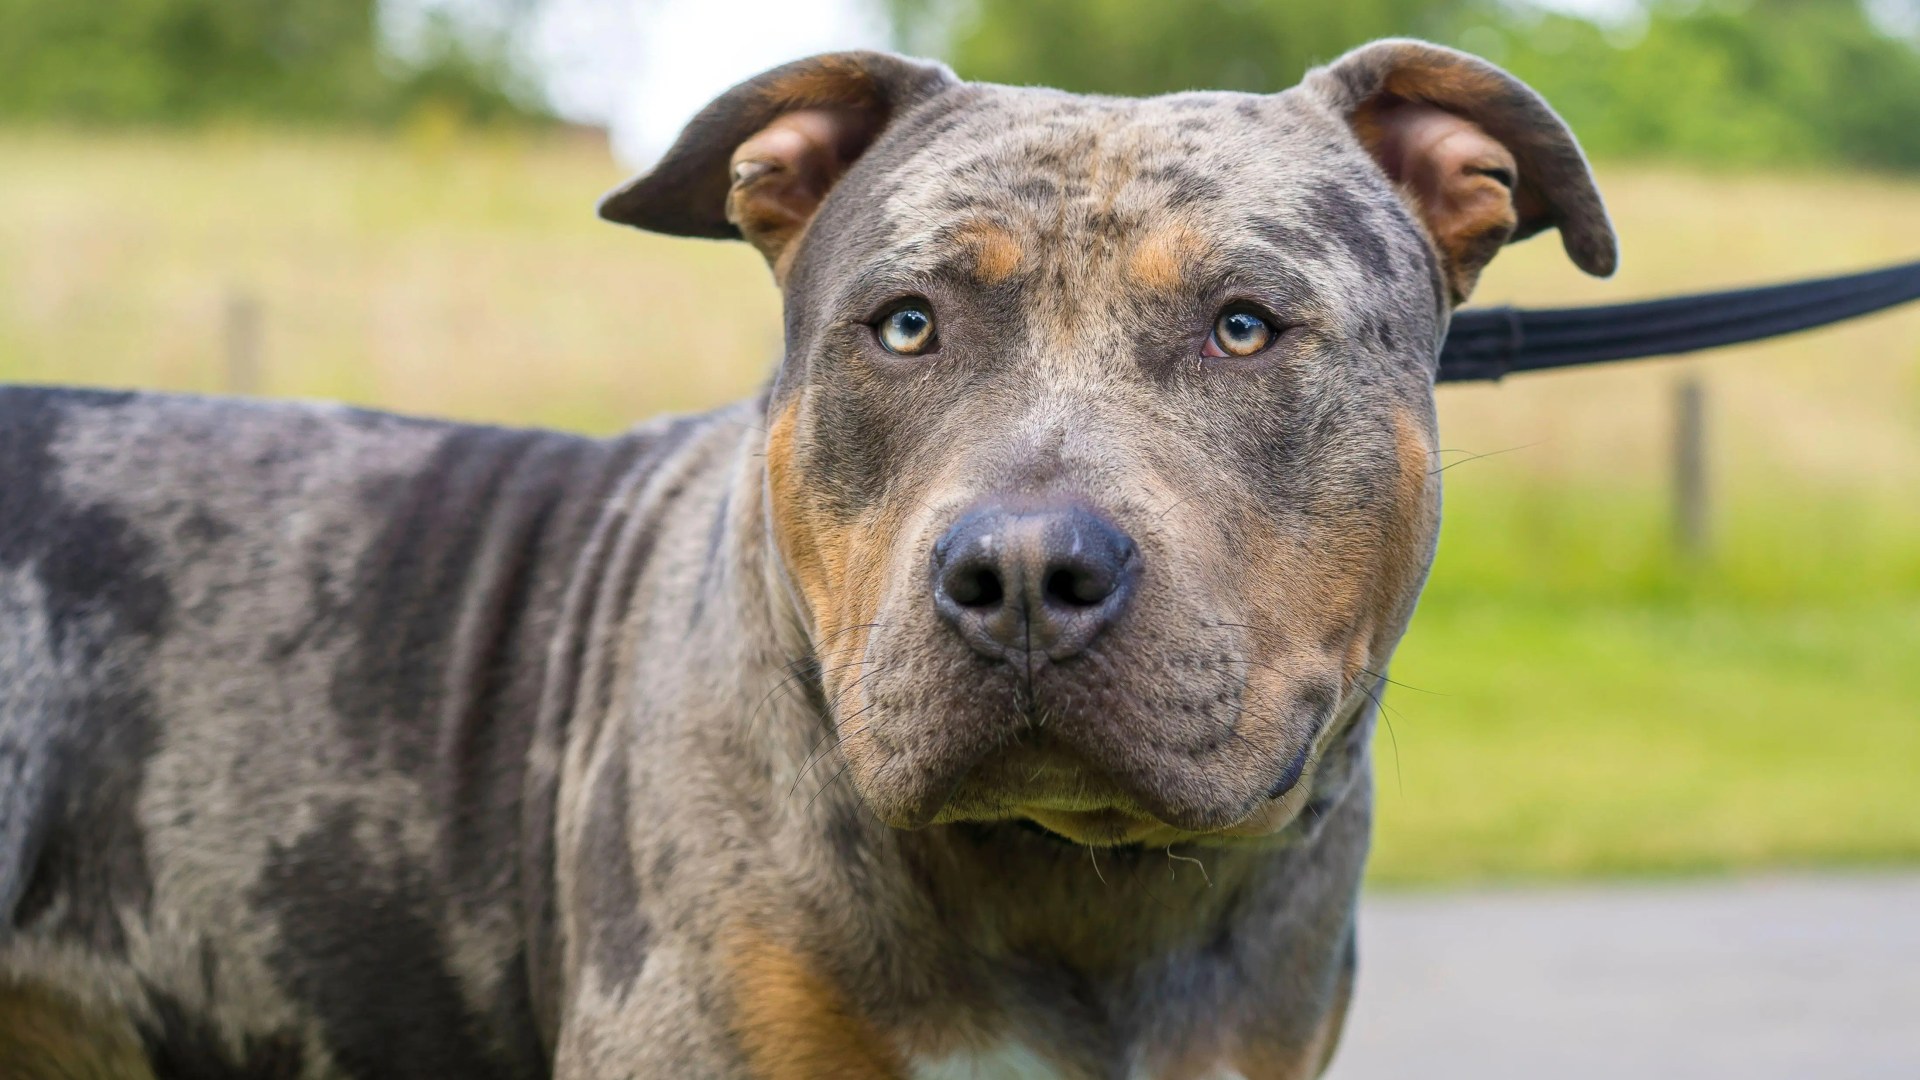 Deadly bully-type dogs for sale online in UK – and ANYONE can buy them without checks